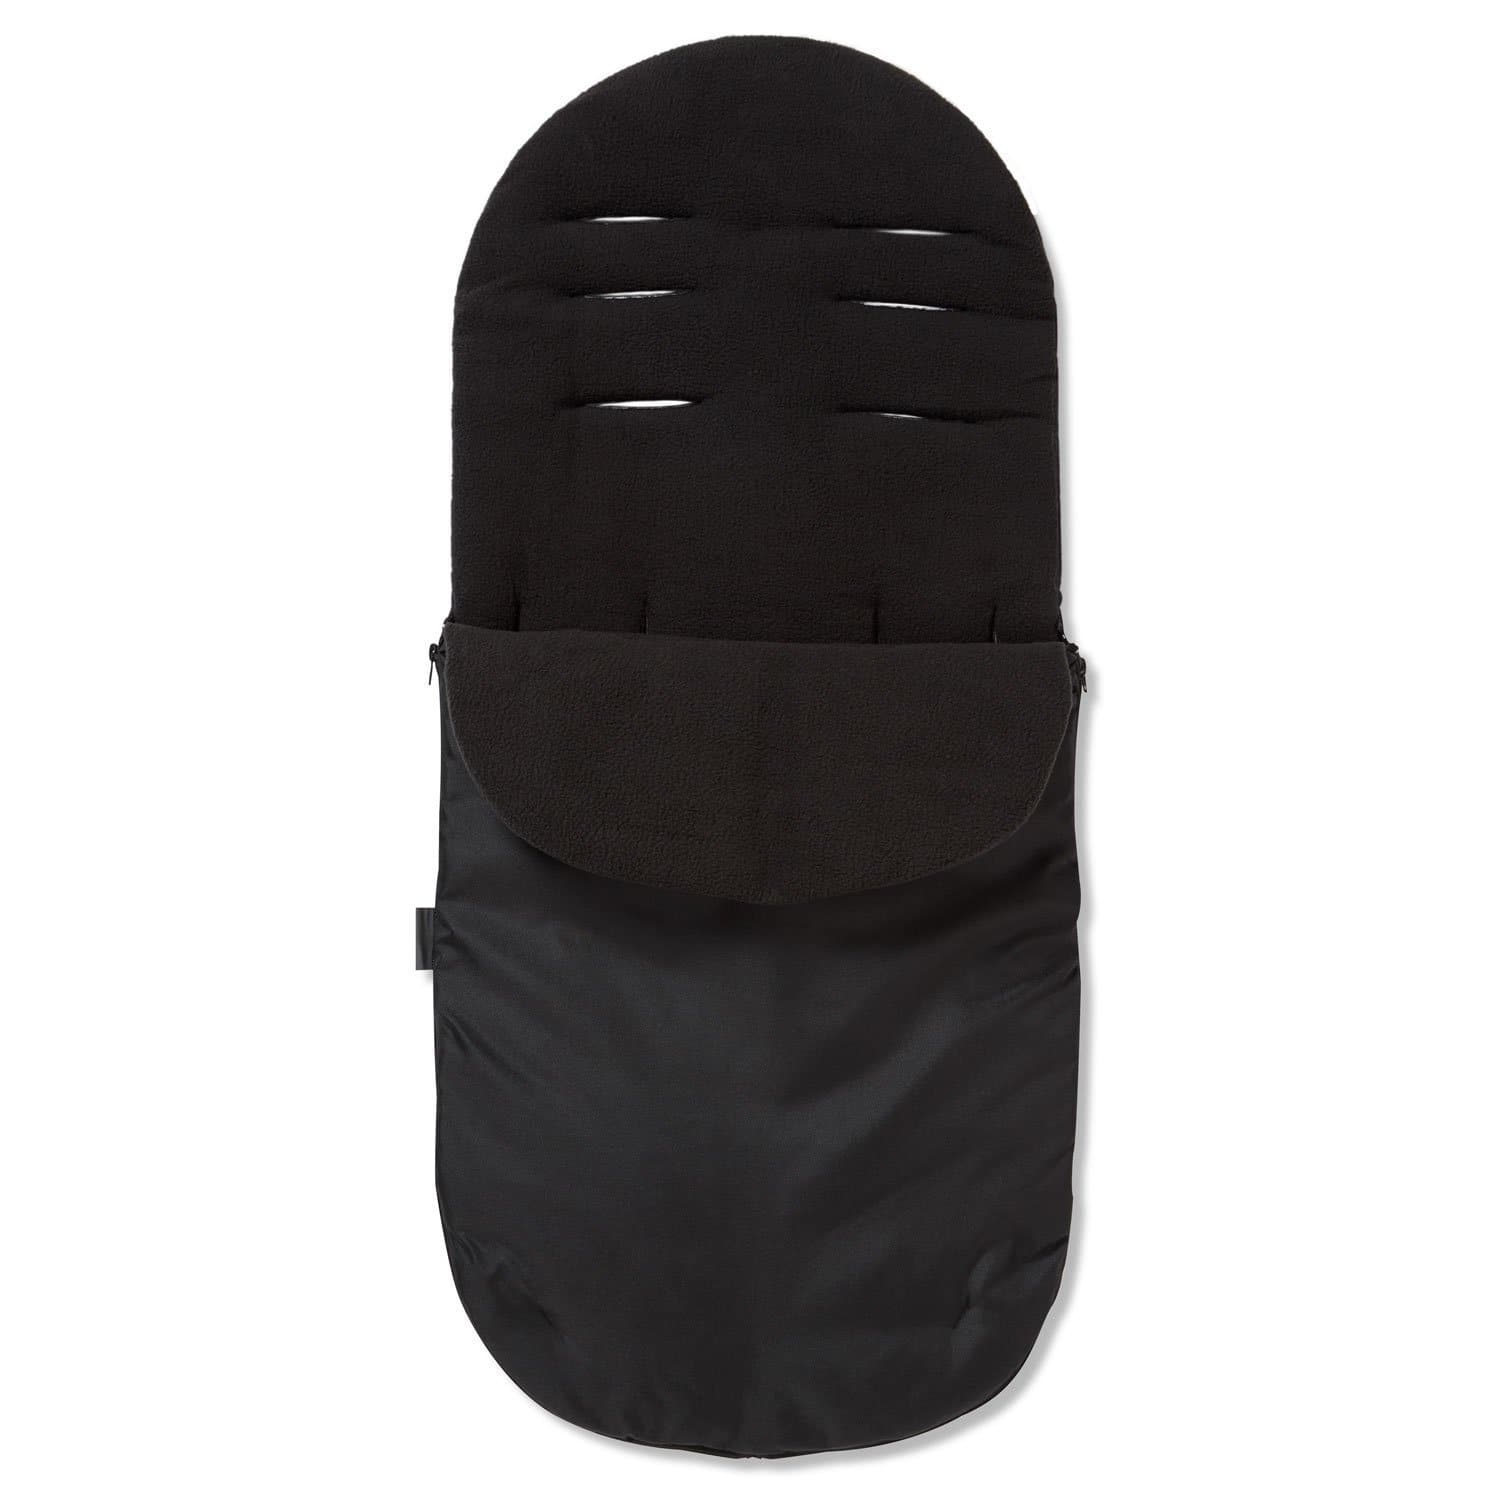 Footmuff / Cosy Toes Compatible with TFK - Black / Fits All Models | For Your Little One